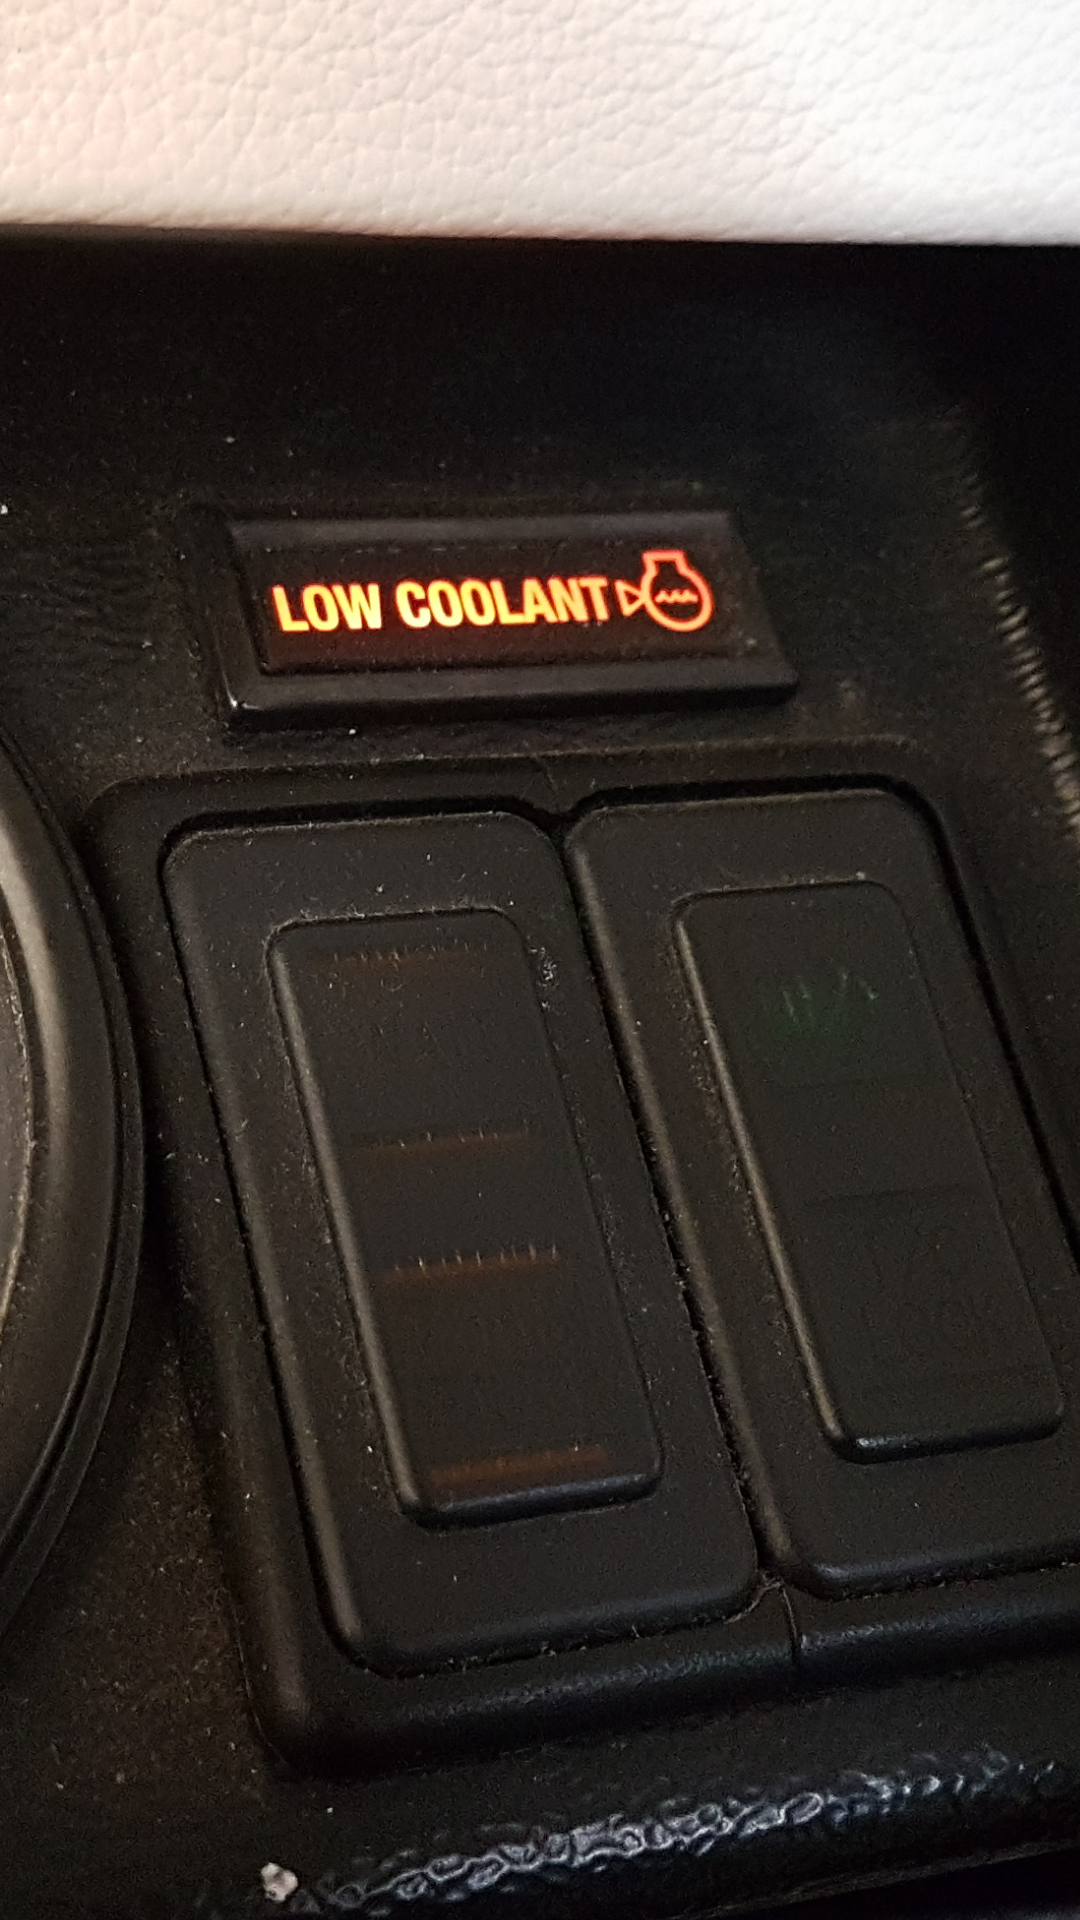 2000 mustang gt low coolant light